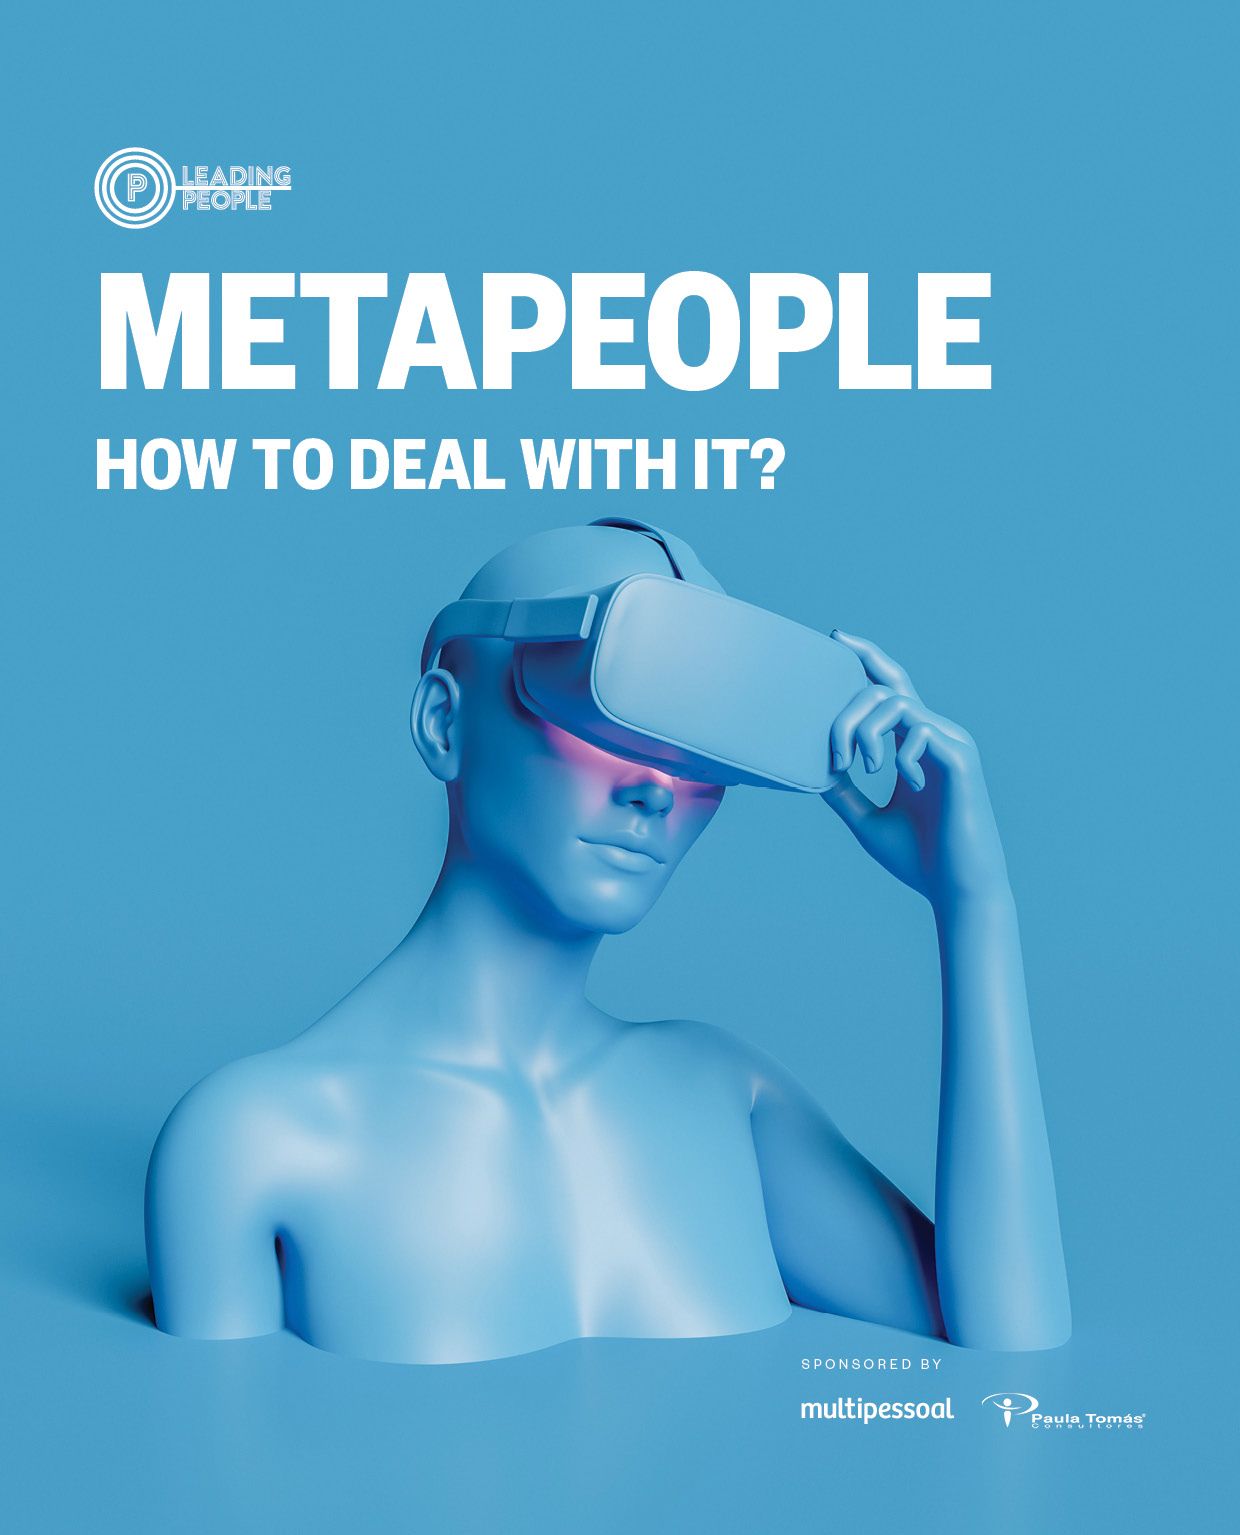 Metapeople - How to deal with it?